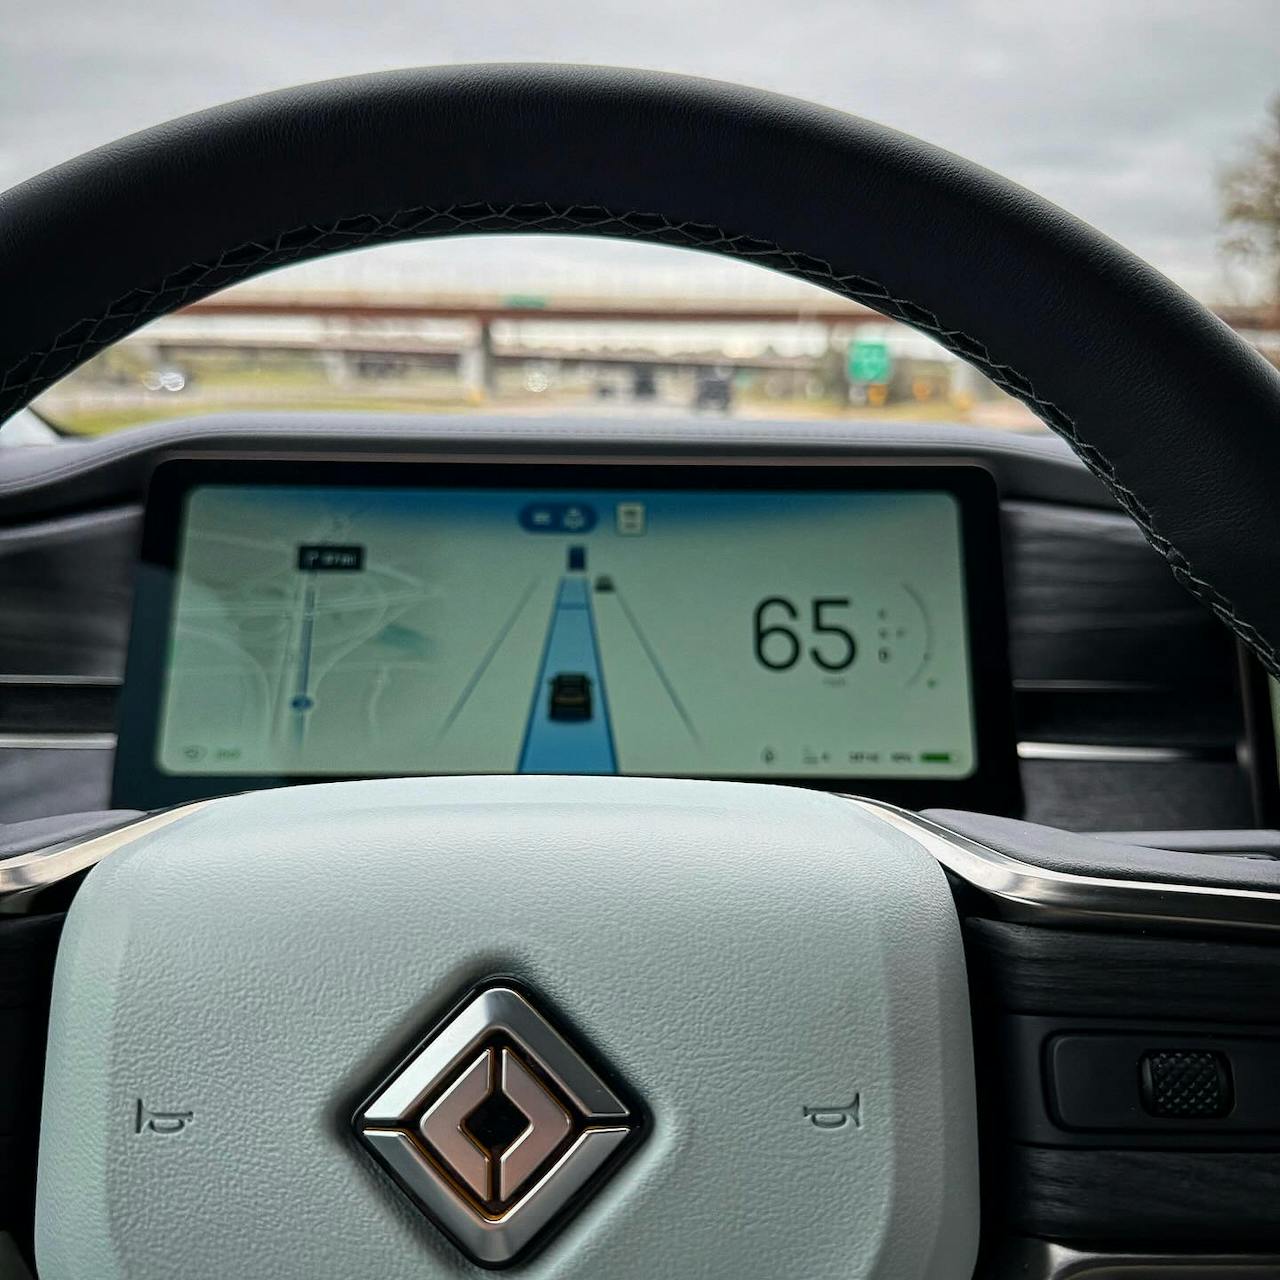 Rivian R1S dashboard showing the lane assist UI, driving at a speed of 65mph